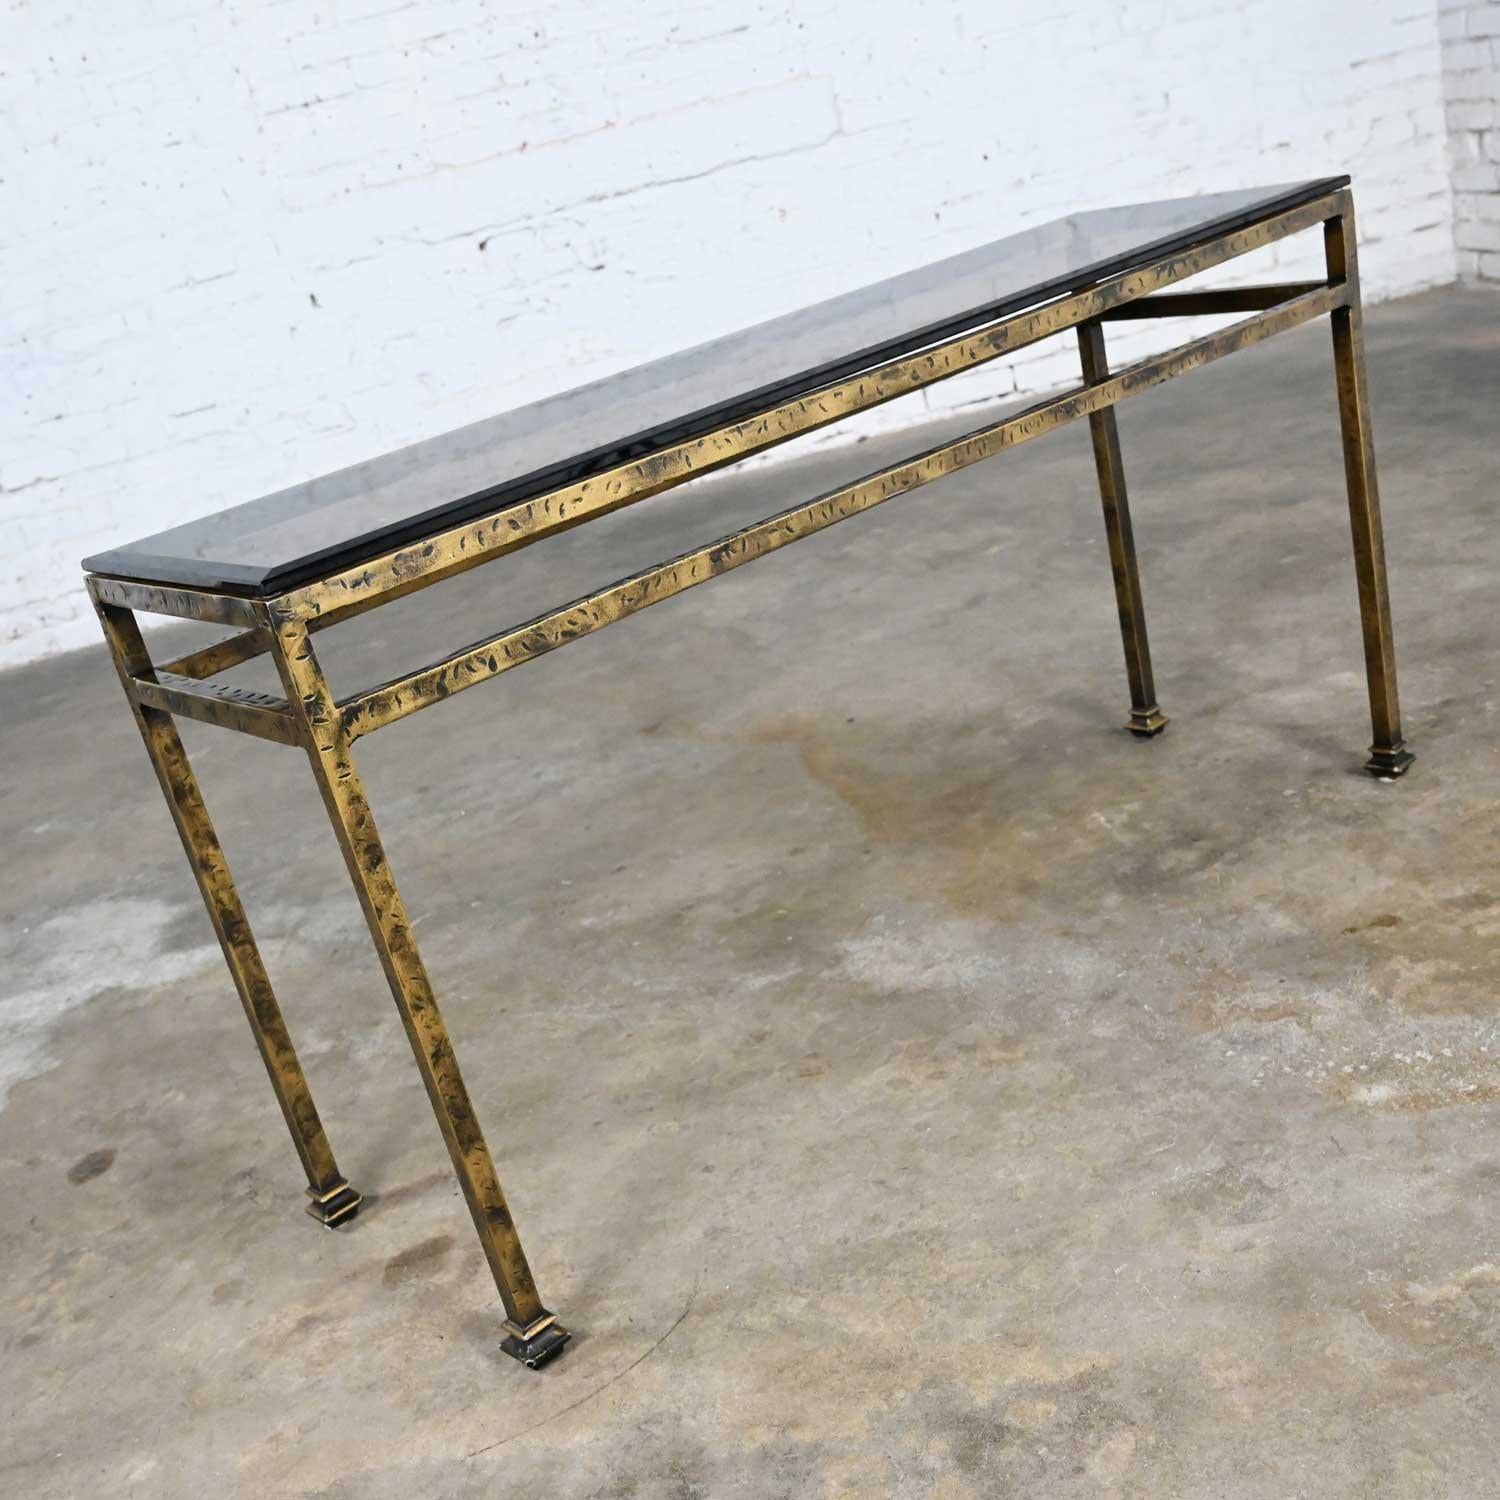 Modern Iron Console Sofa Table Gold Hammered Look & Smoked & Beveled Glass Top In Good Condition For Sale In Topeka, KS